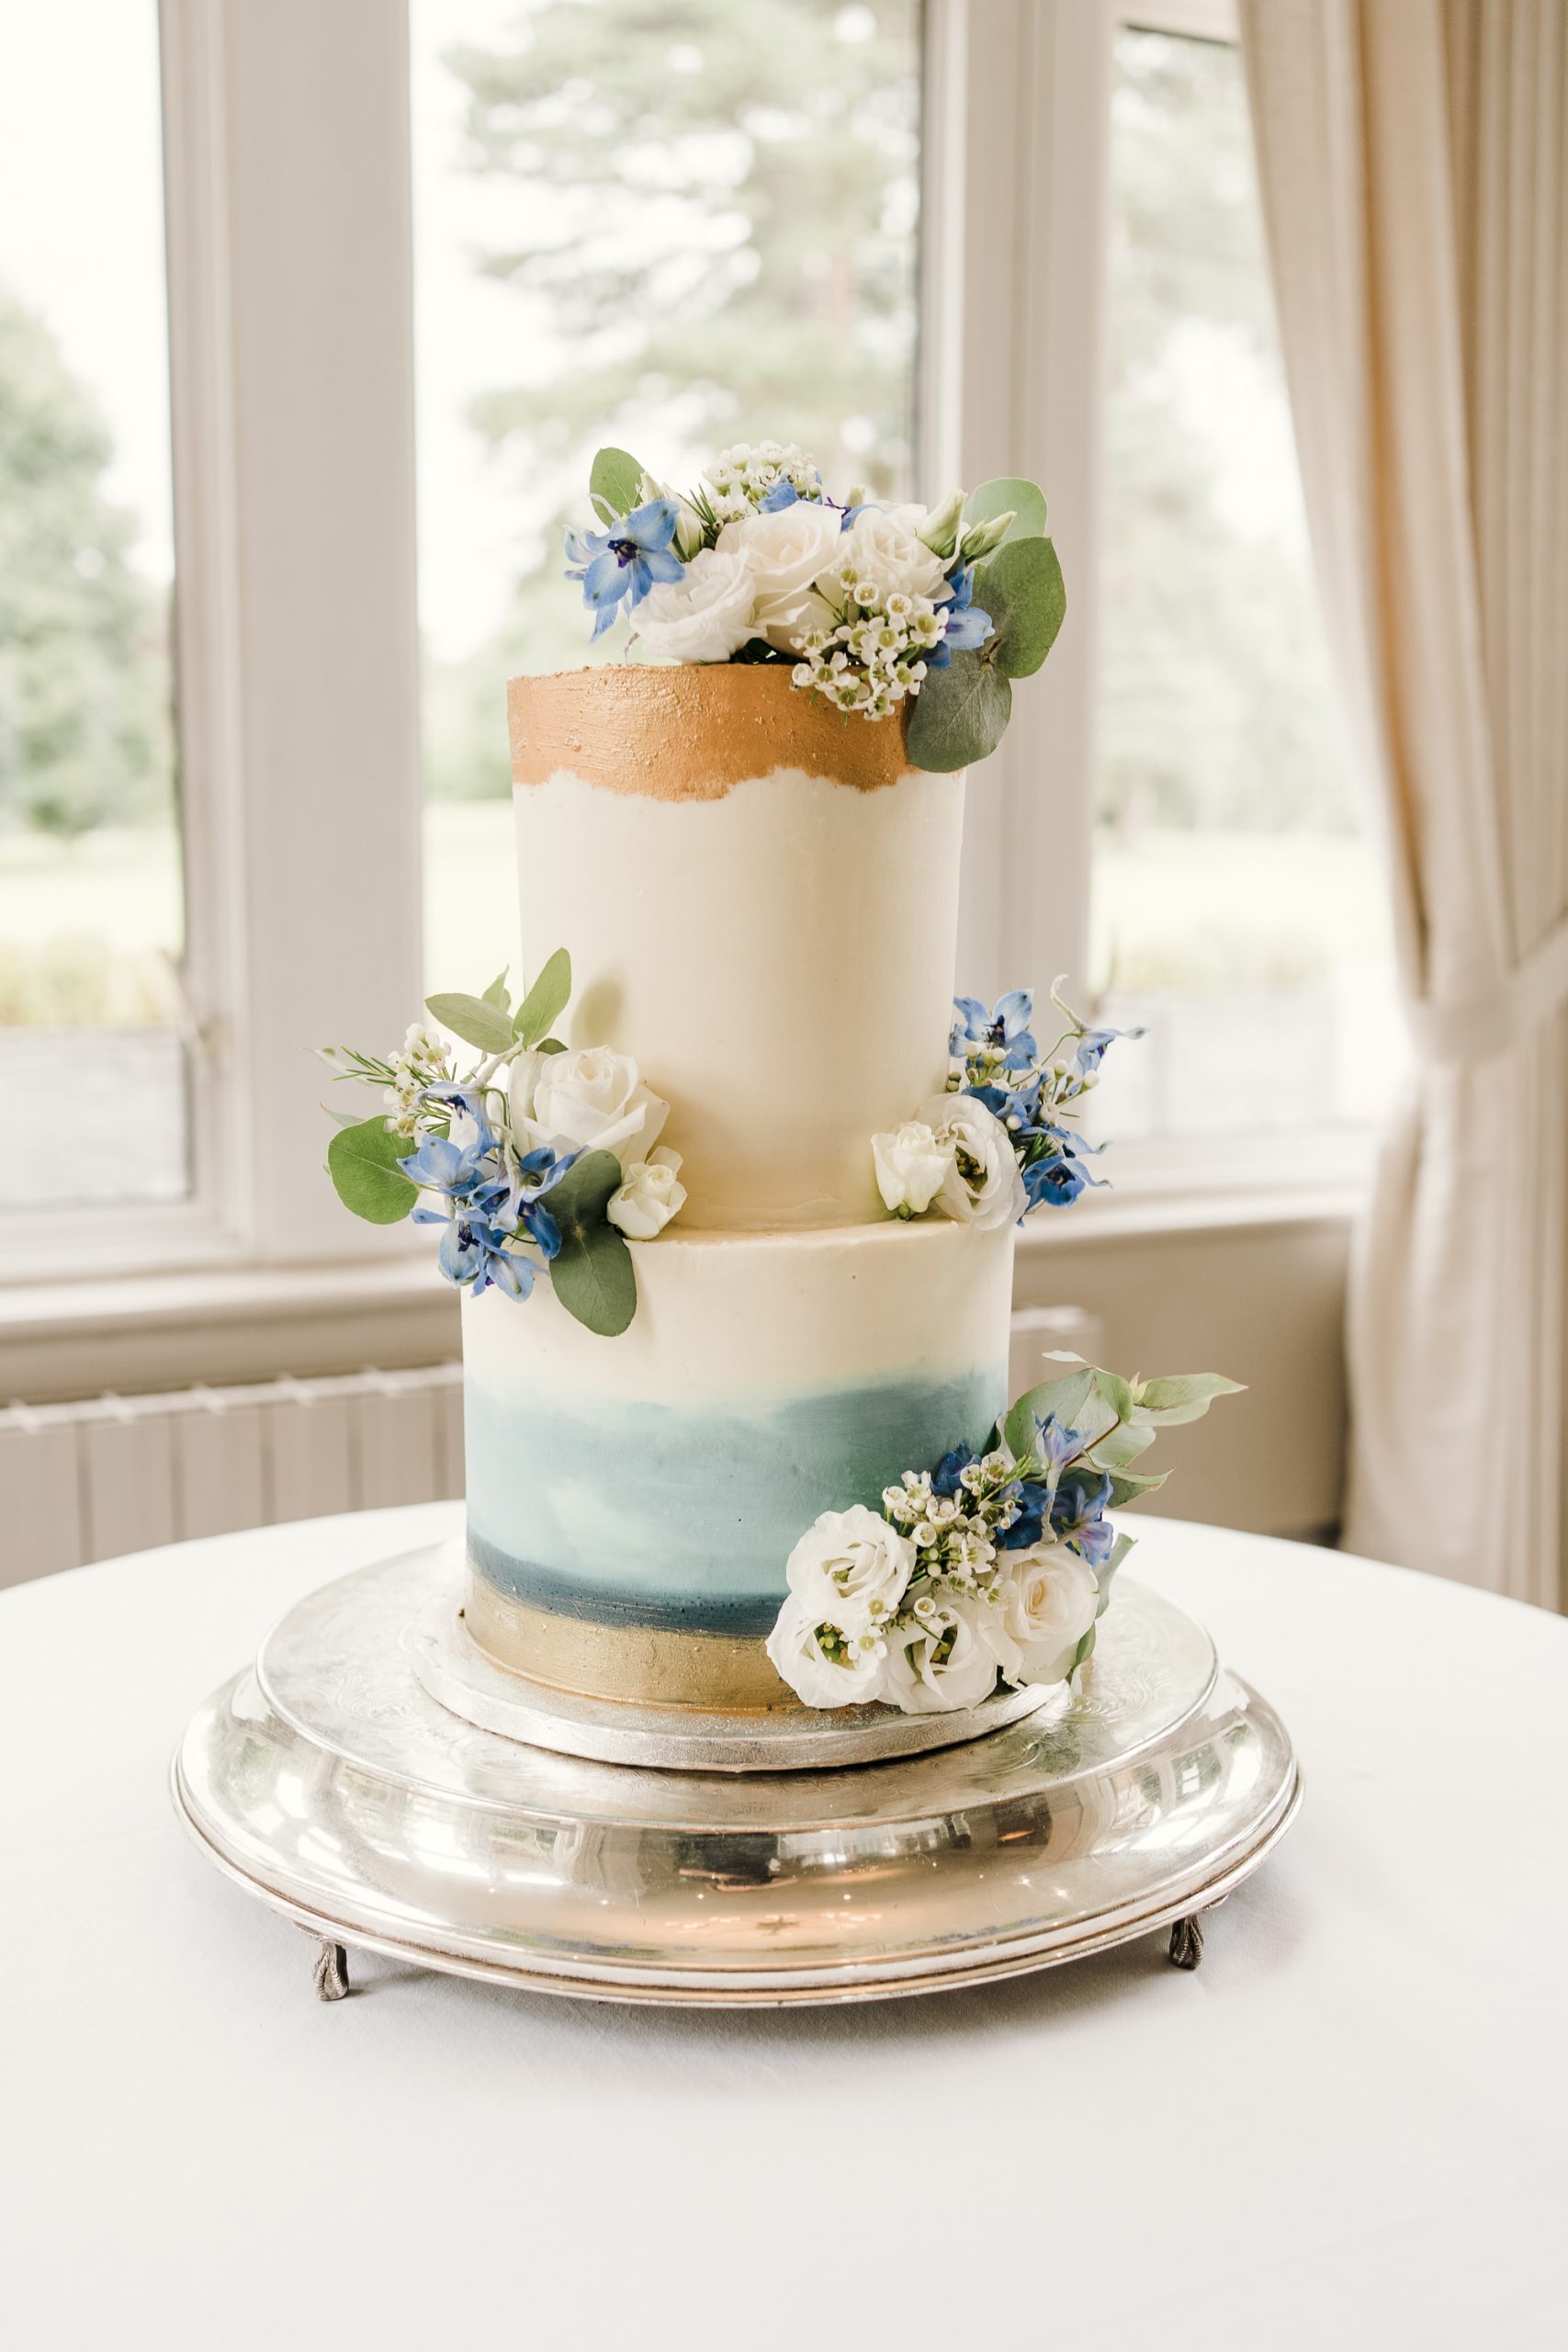 Hand painted cake for a blue themed wedding.